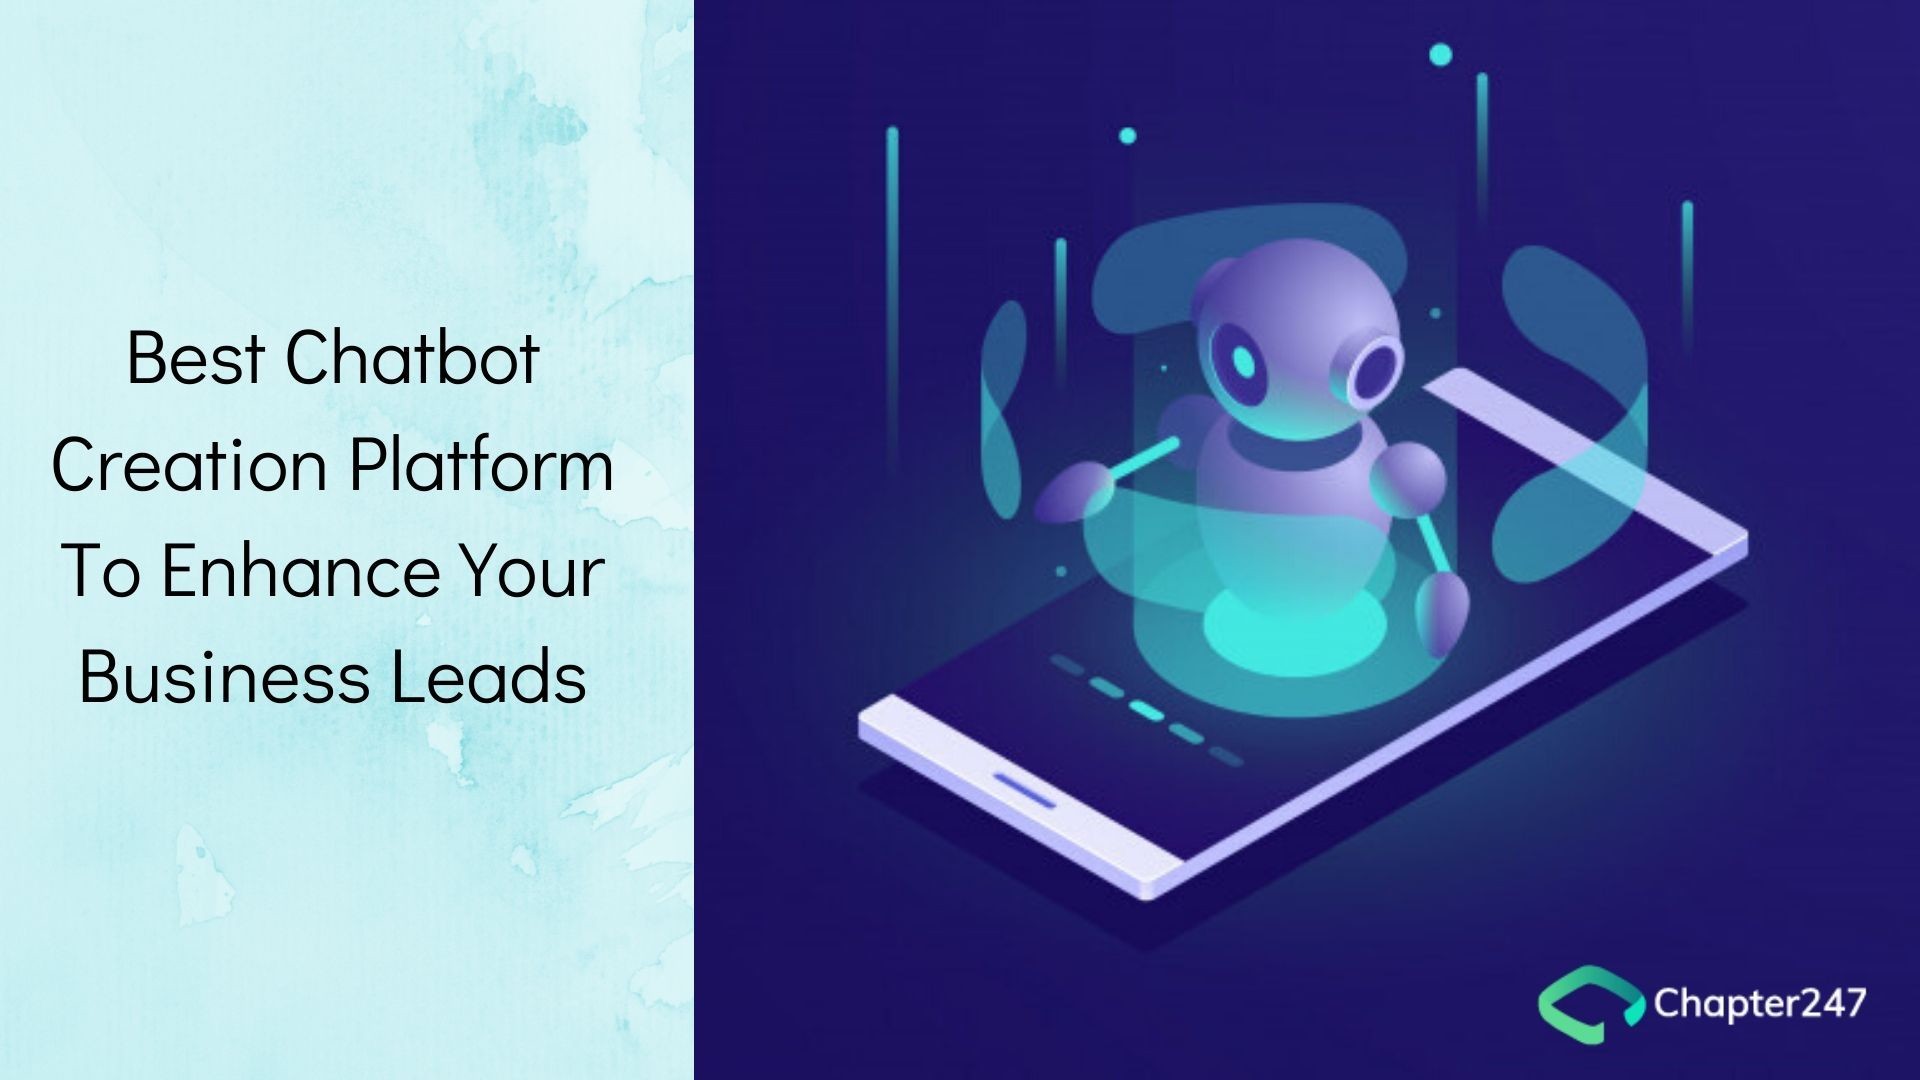 Best Chatbot Creation Platform To Enhance Your Business Leads 